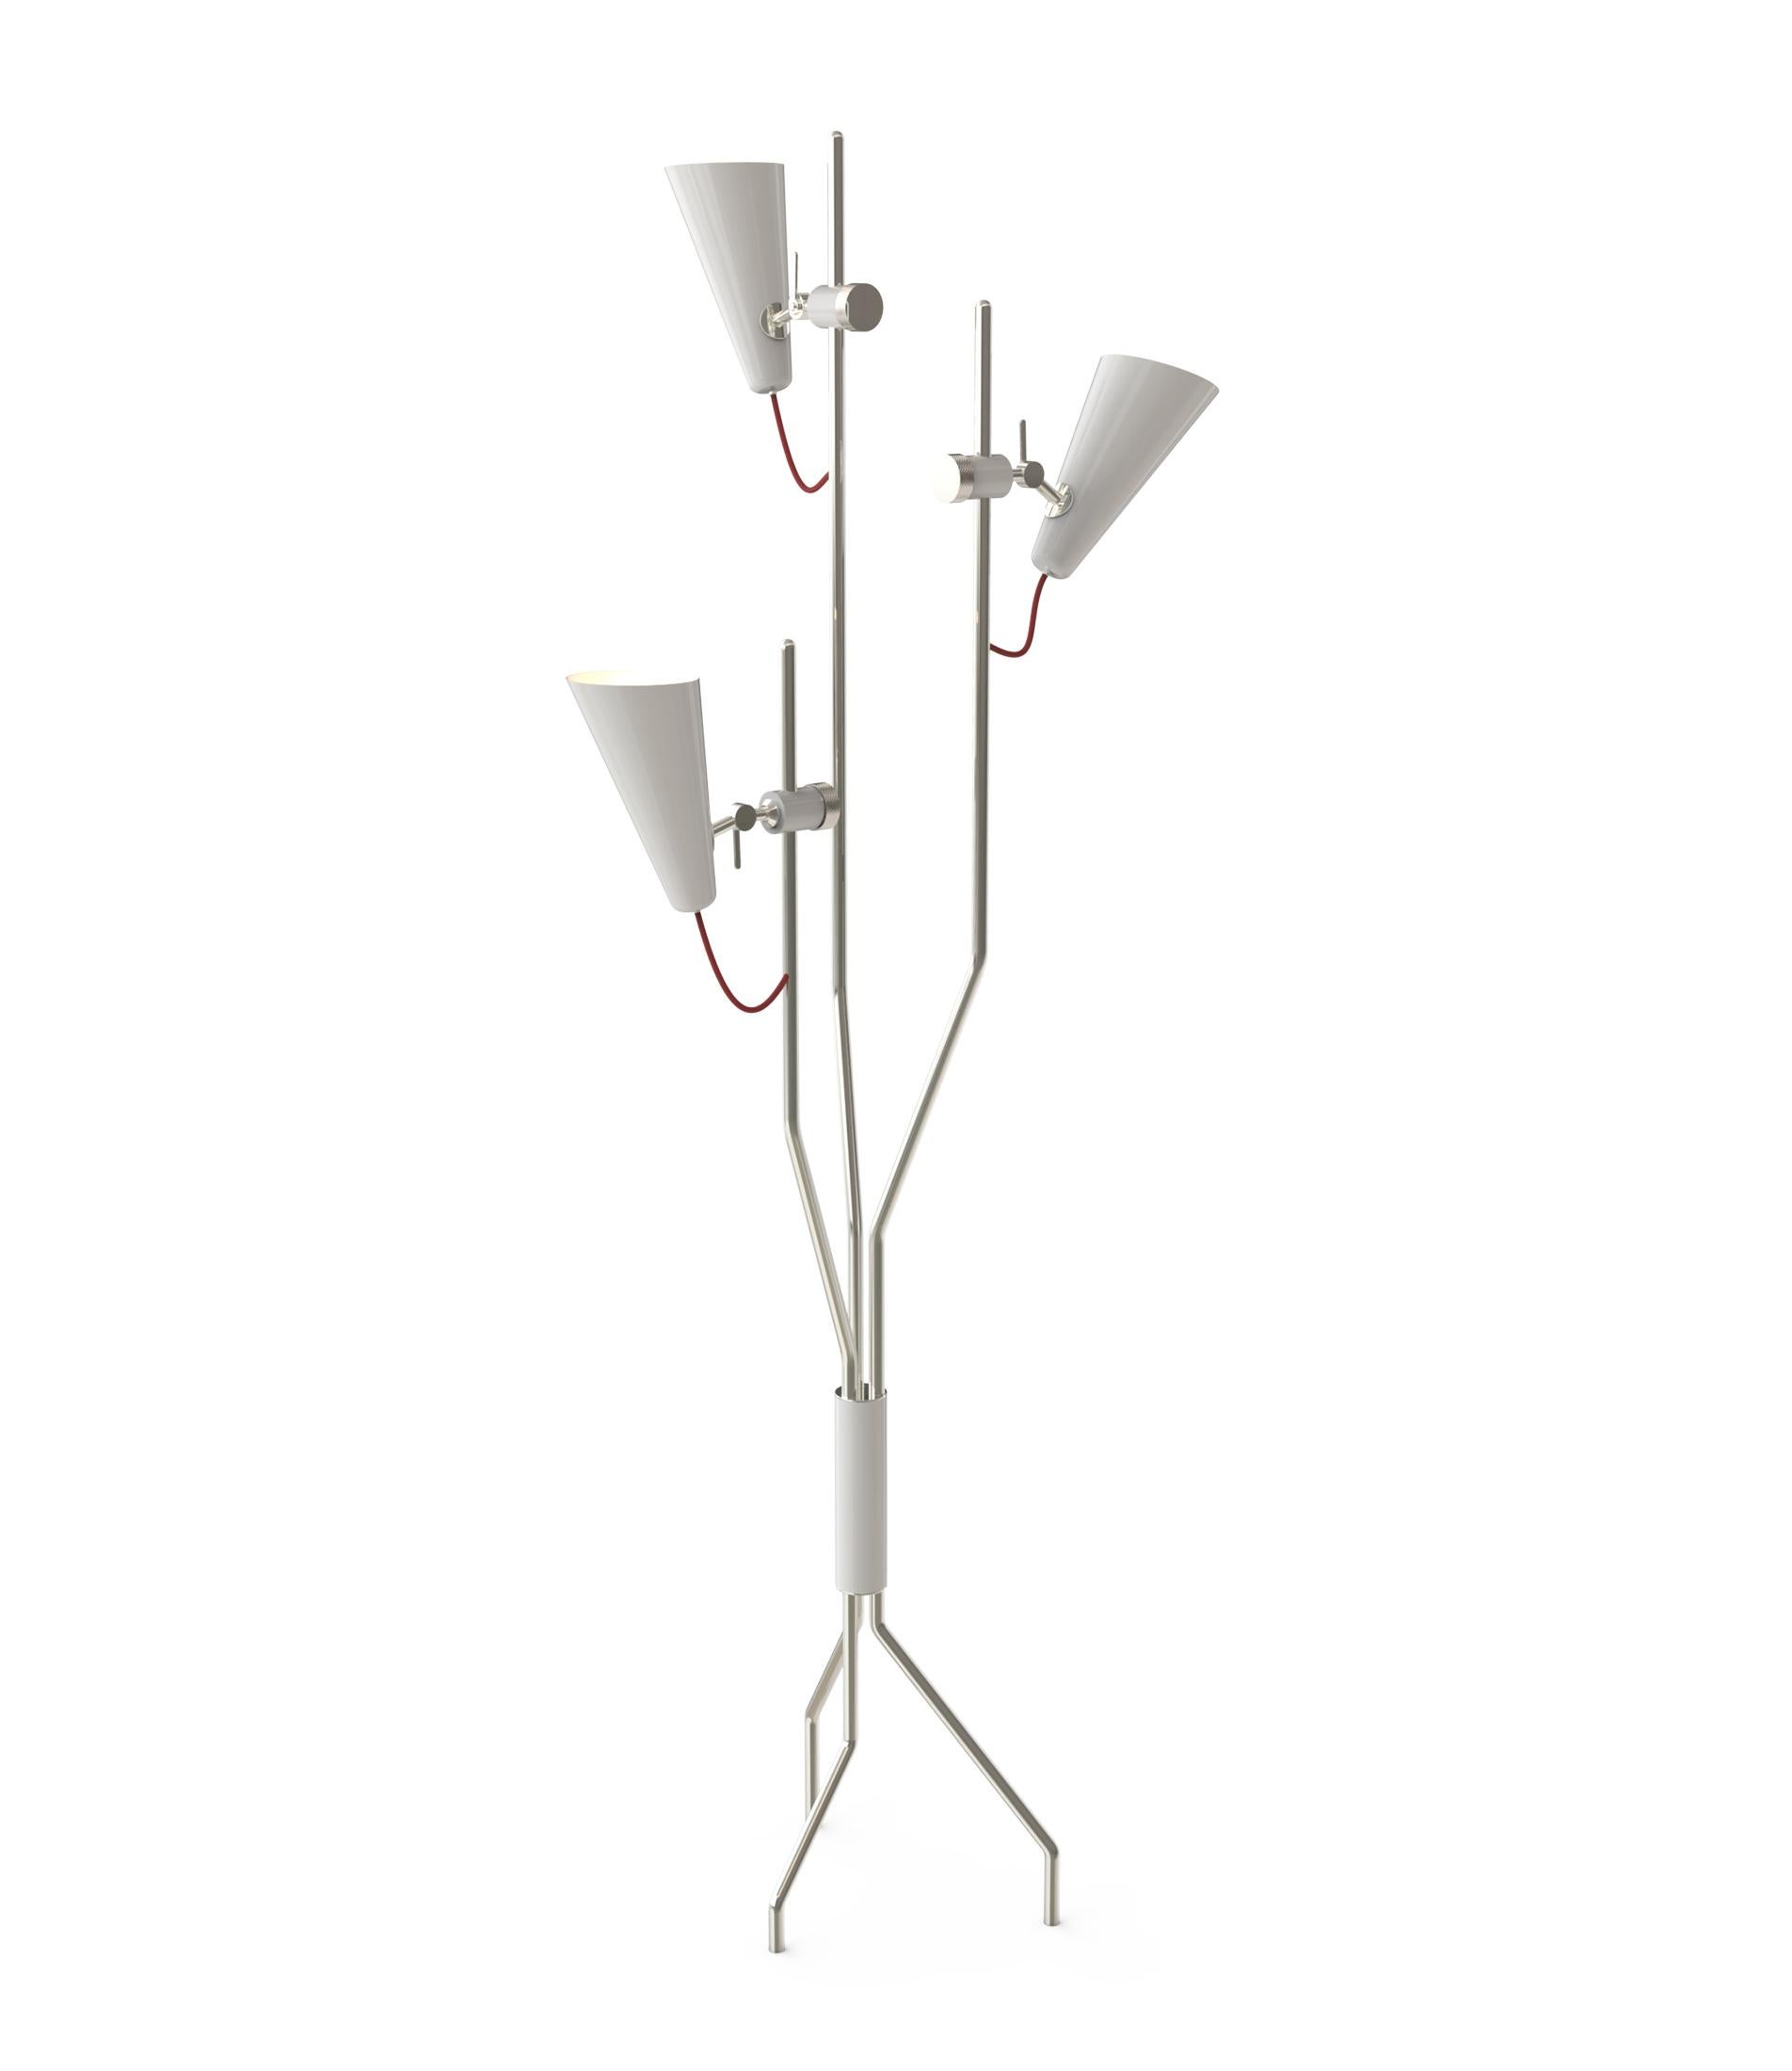 With a mid-century modern vibe, this Evans floor lamp has three diffusers. Each shade is moveable and adjusts making this a very functional light source that can be changed depending on where it is placed. This tripod floor lamp features an